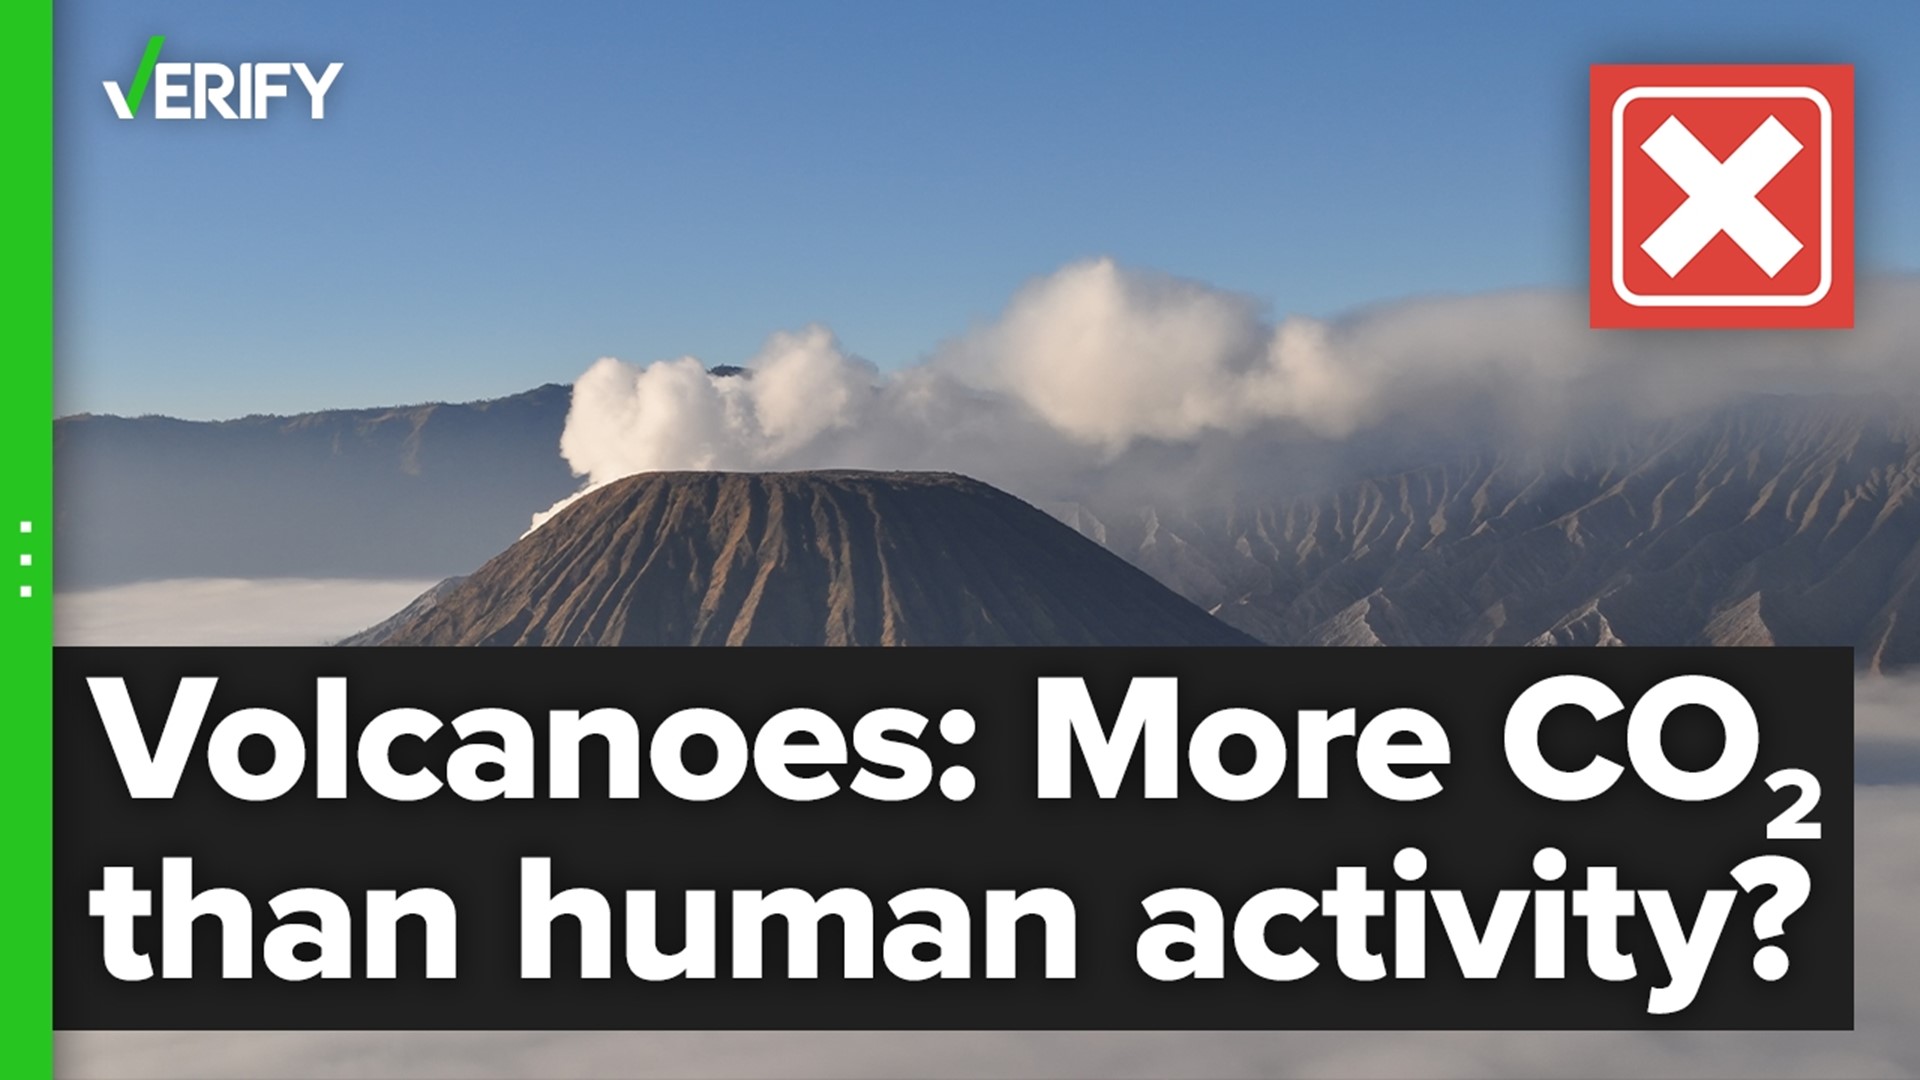 The VERIFY team looks into a claim made on social media arguing that volcanoes emit more CO2 than humans. Sources from NASA and NOAA confirm this is false.